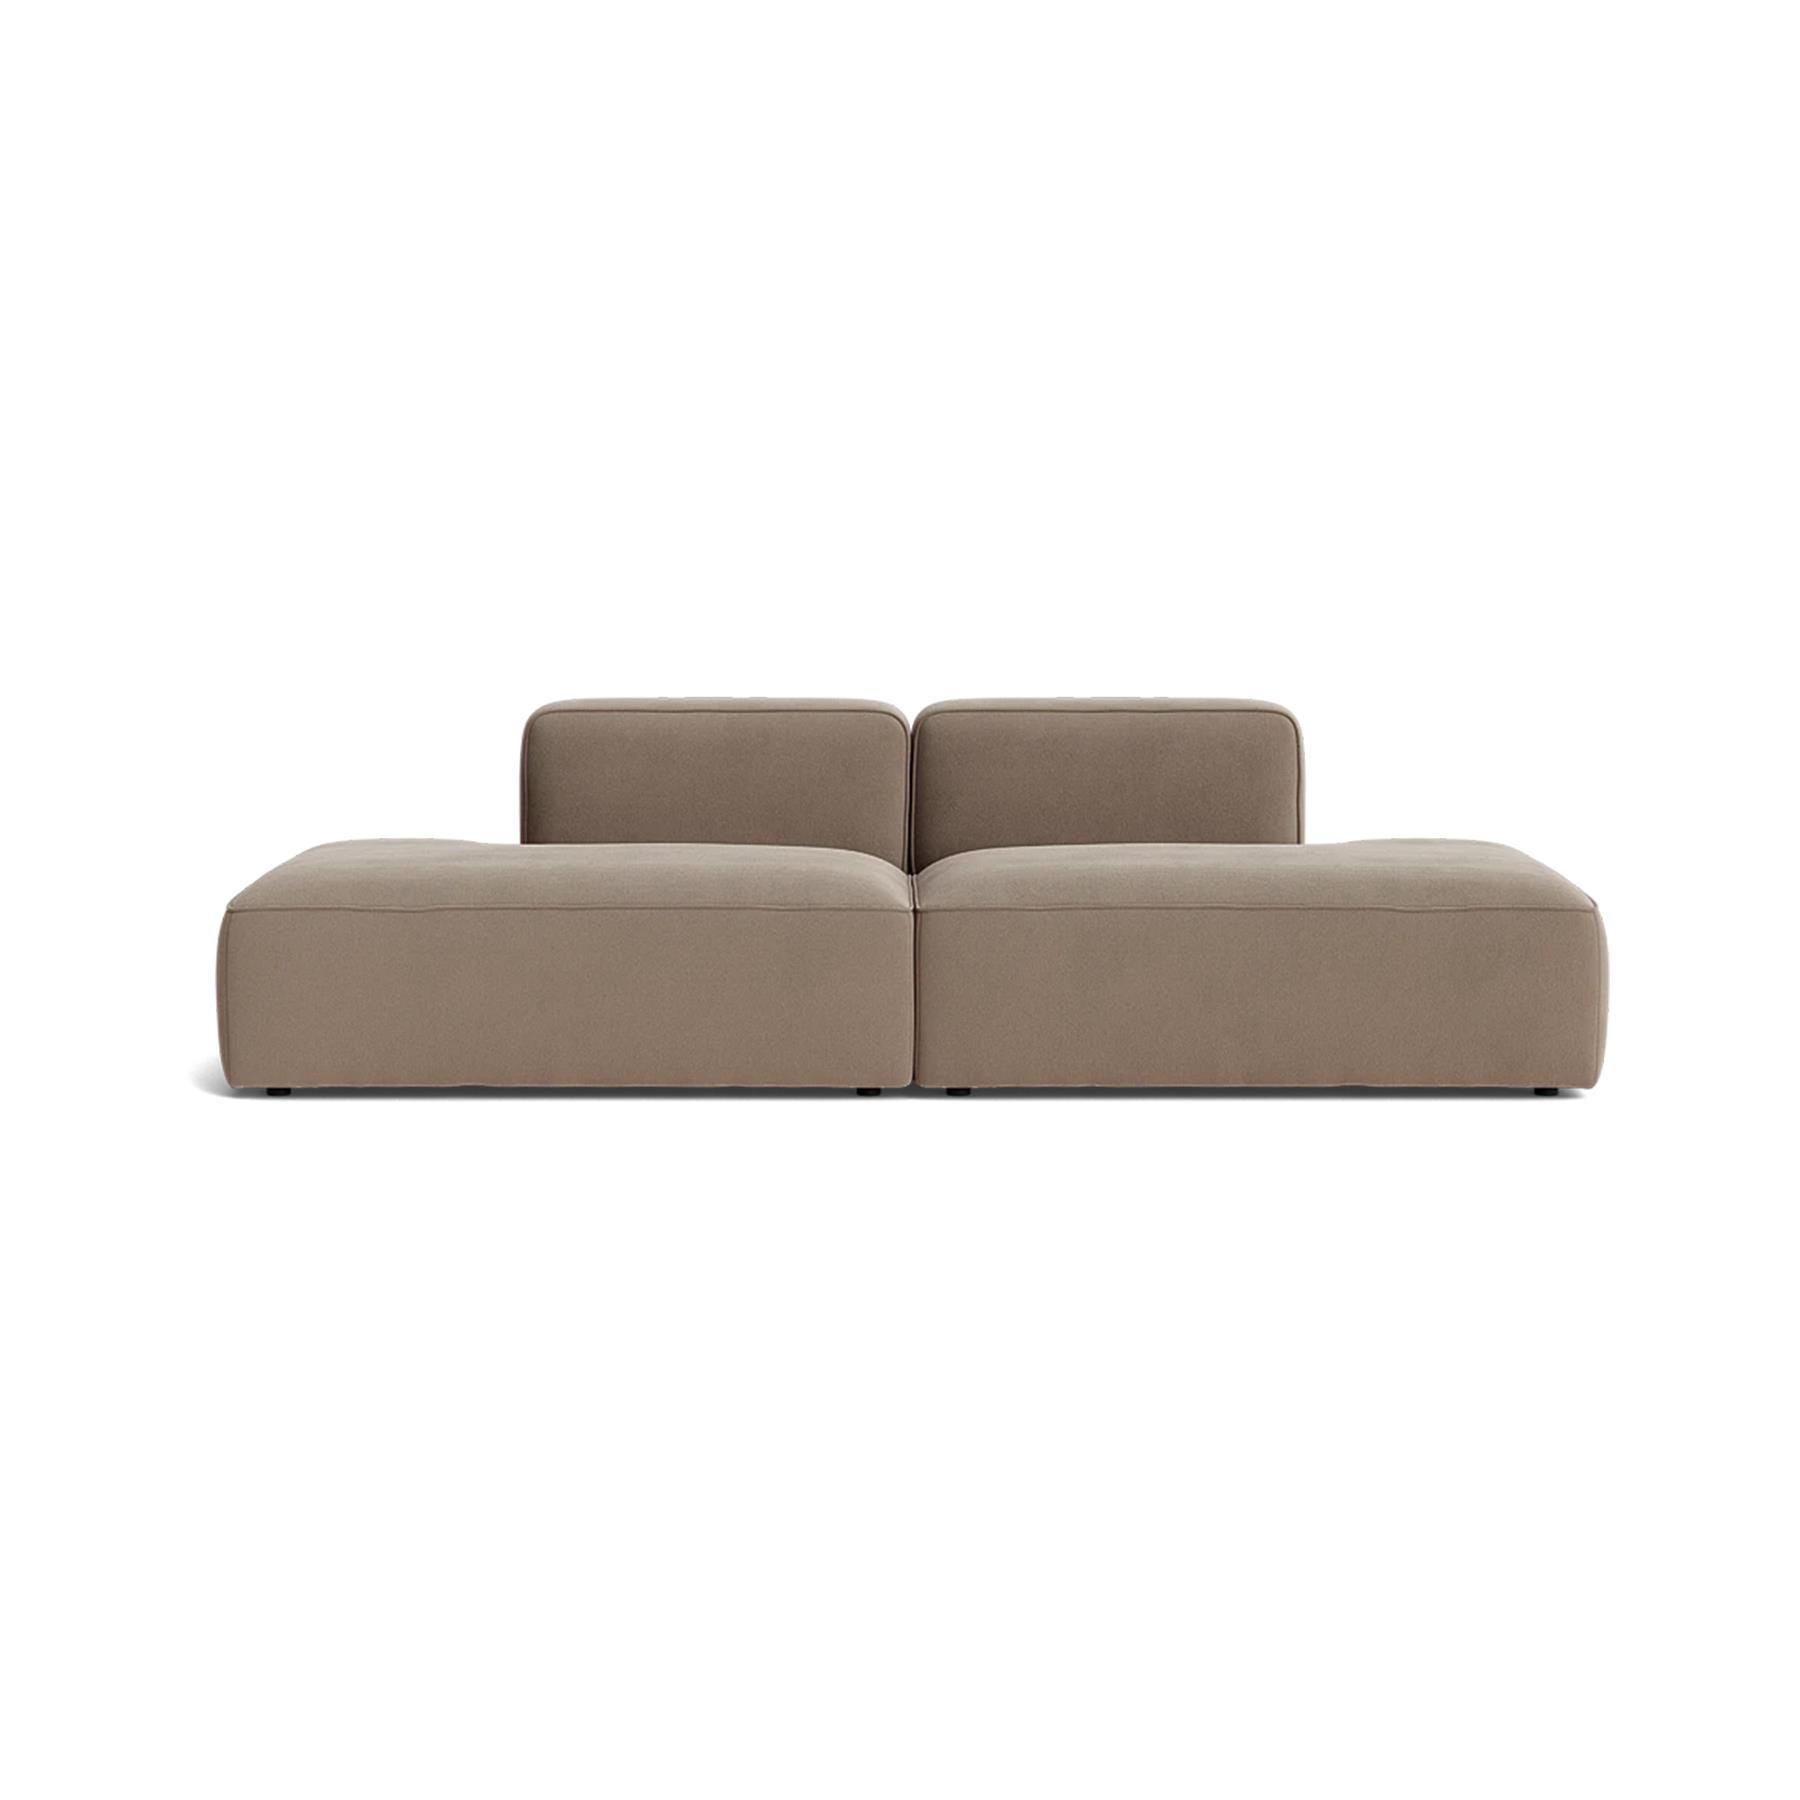 Make Nordic Basecamp Sofa With 2 Open Ends Nordic Velvet 70 Brown Designer Furniture From Holloways Of Ludlow